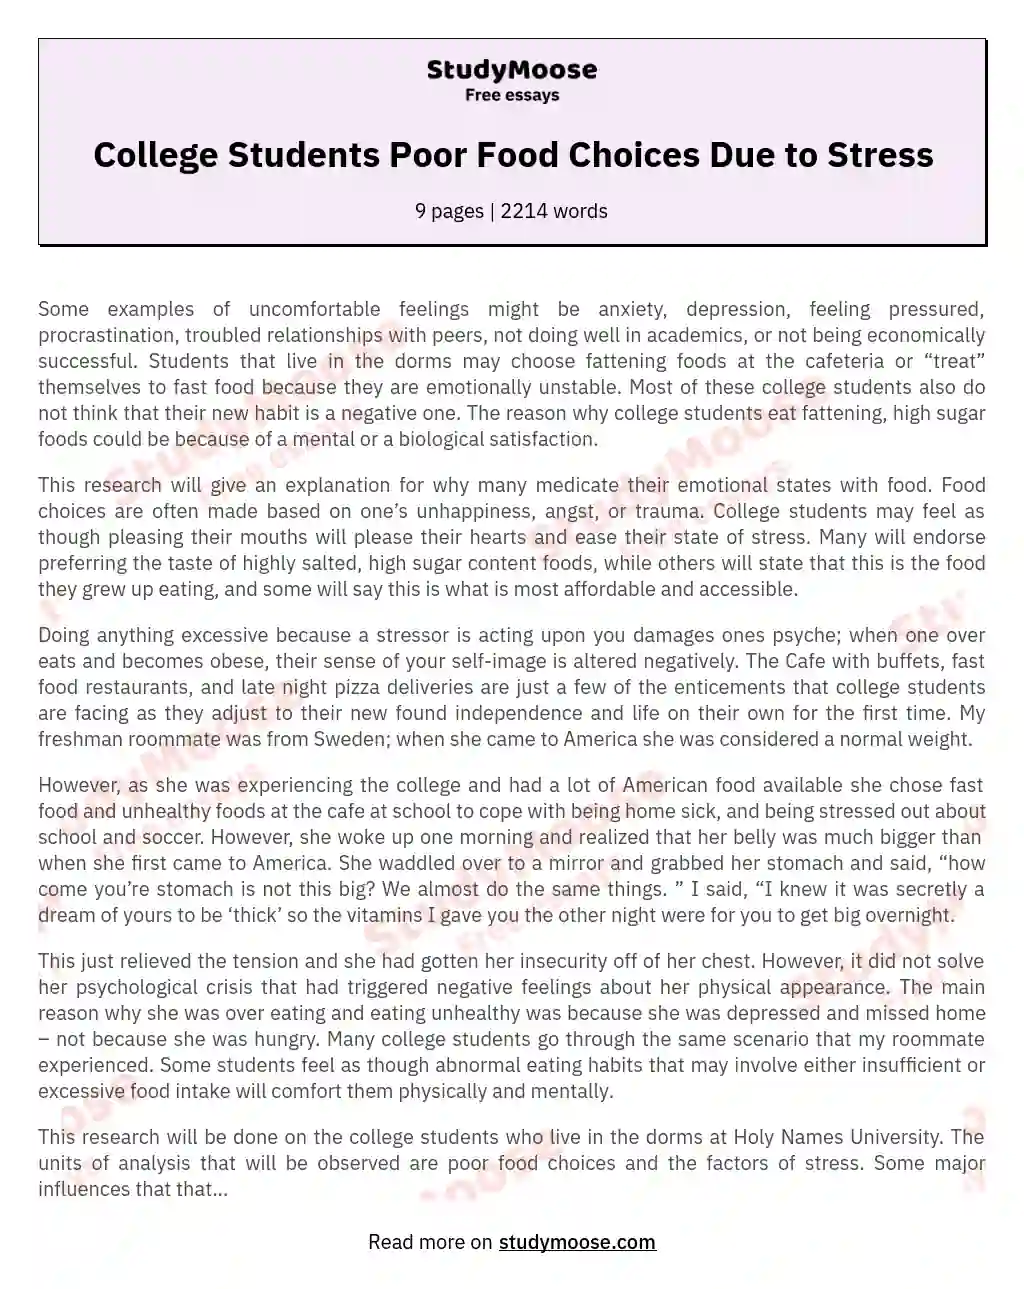 College Students Poor Food Choices Due to Stress essay